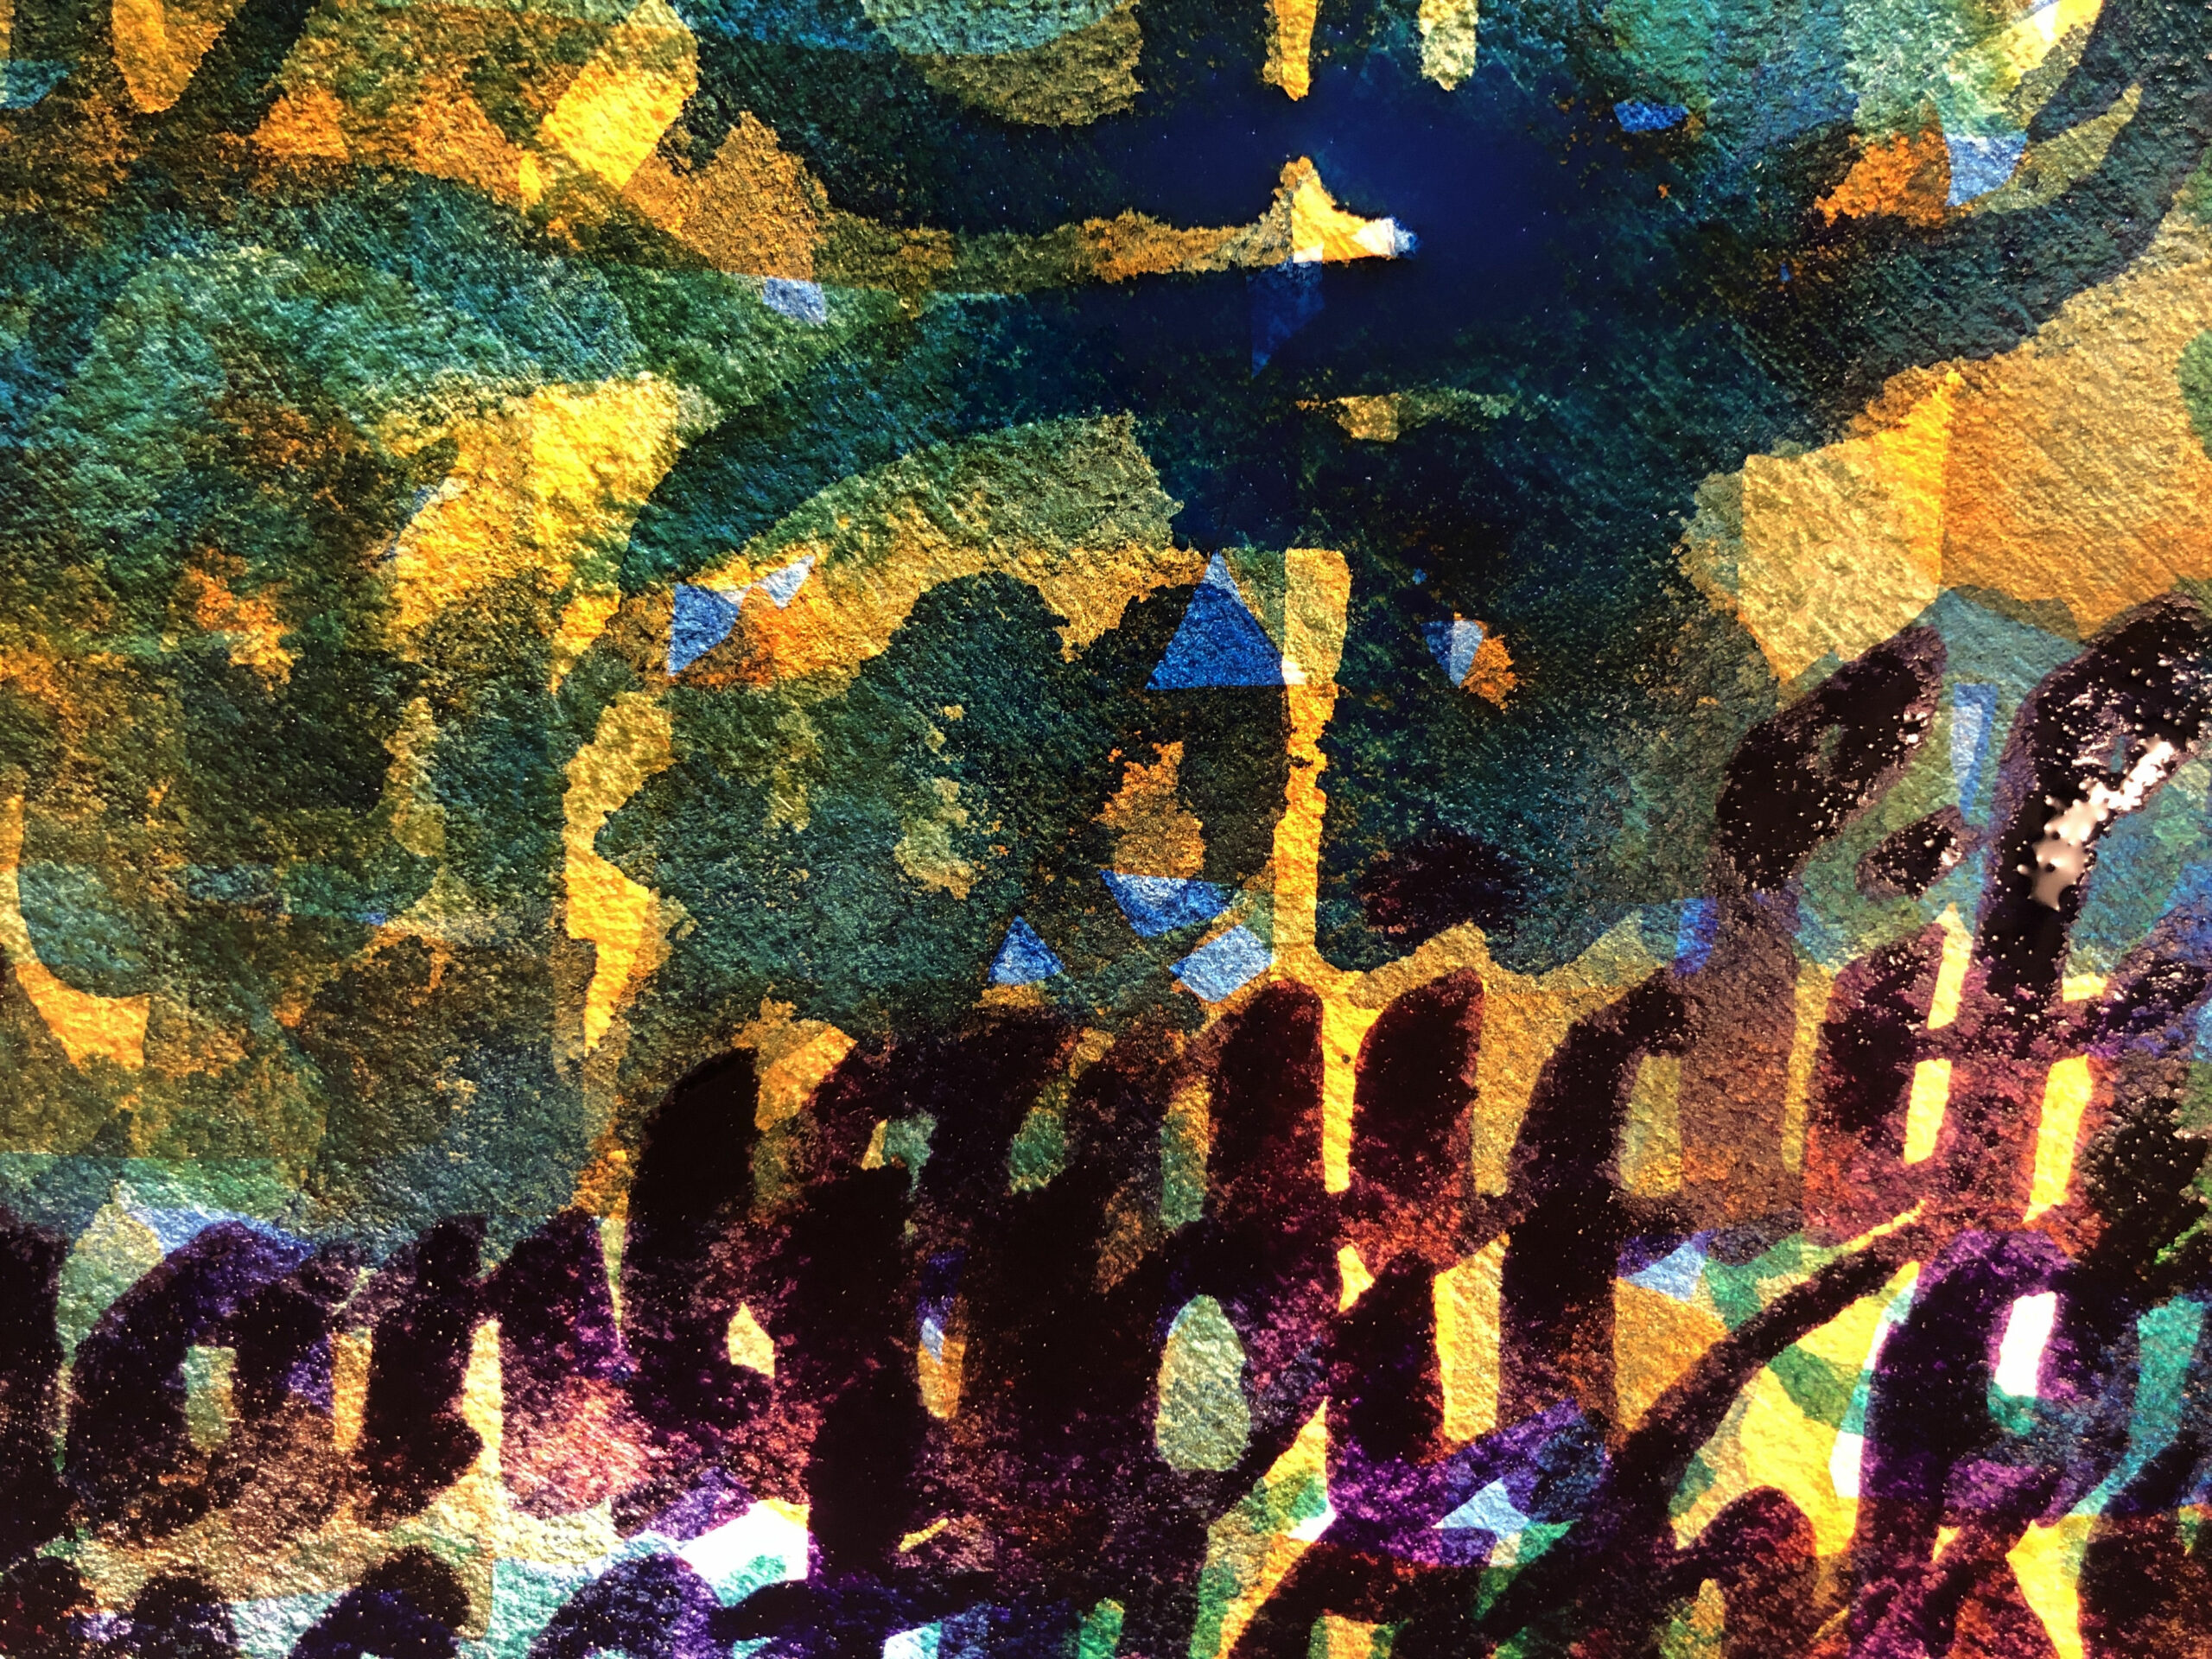 layers of hand lettering in orange, gold, plum/purple, and phthalo blue; "anidifr" and "ankyou" are partially legible; some of the plum ink is wet and reflects light